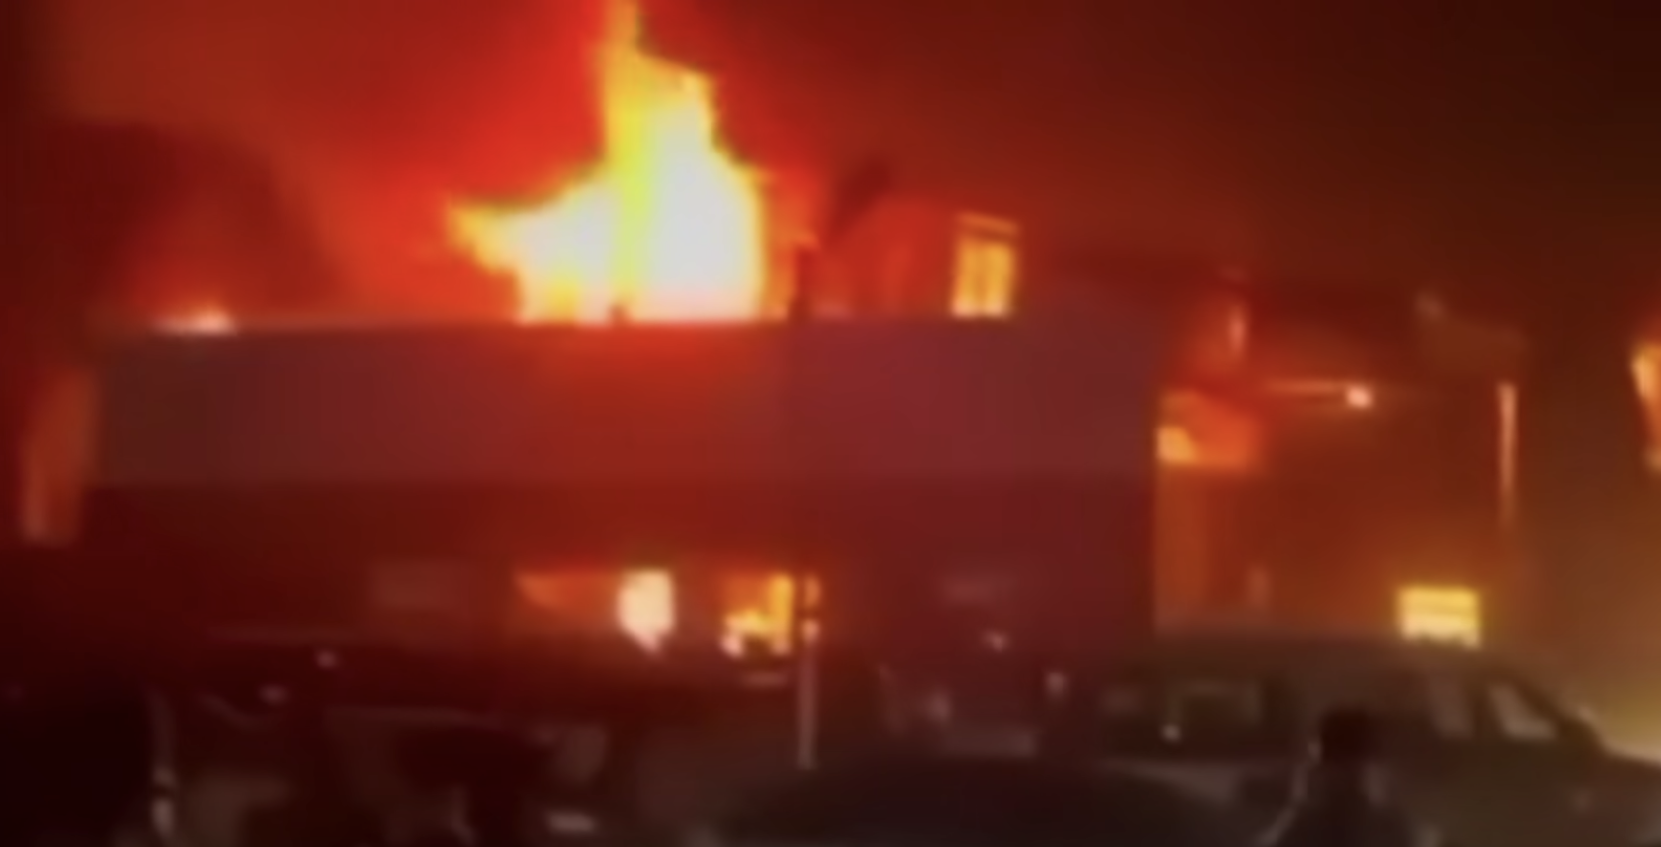 The wedding hall where Revan and Haneen Isho held their reception burning down | Source: youtube.com/@SkyNews